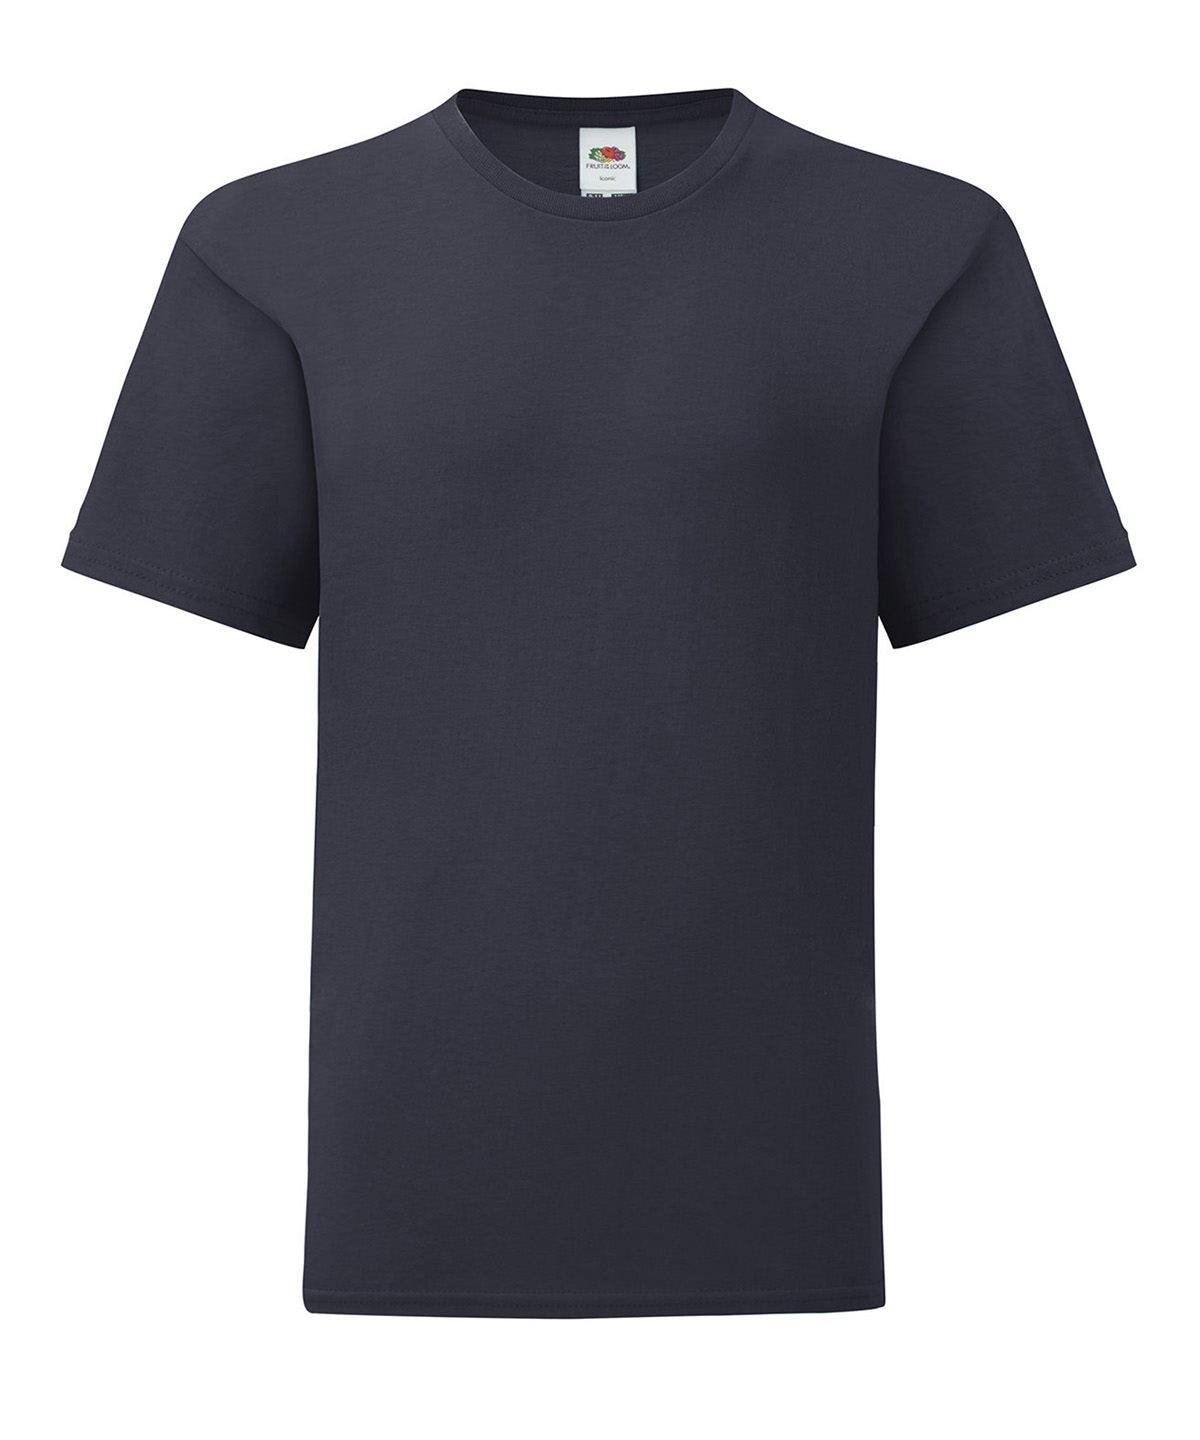 Fruit of the Loom Kids iconic 150 T Deep Navy